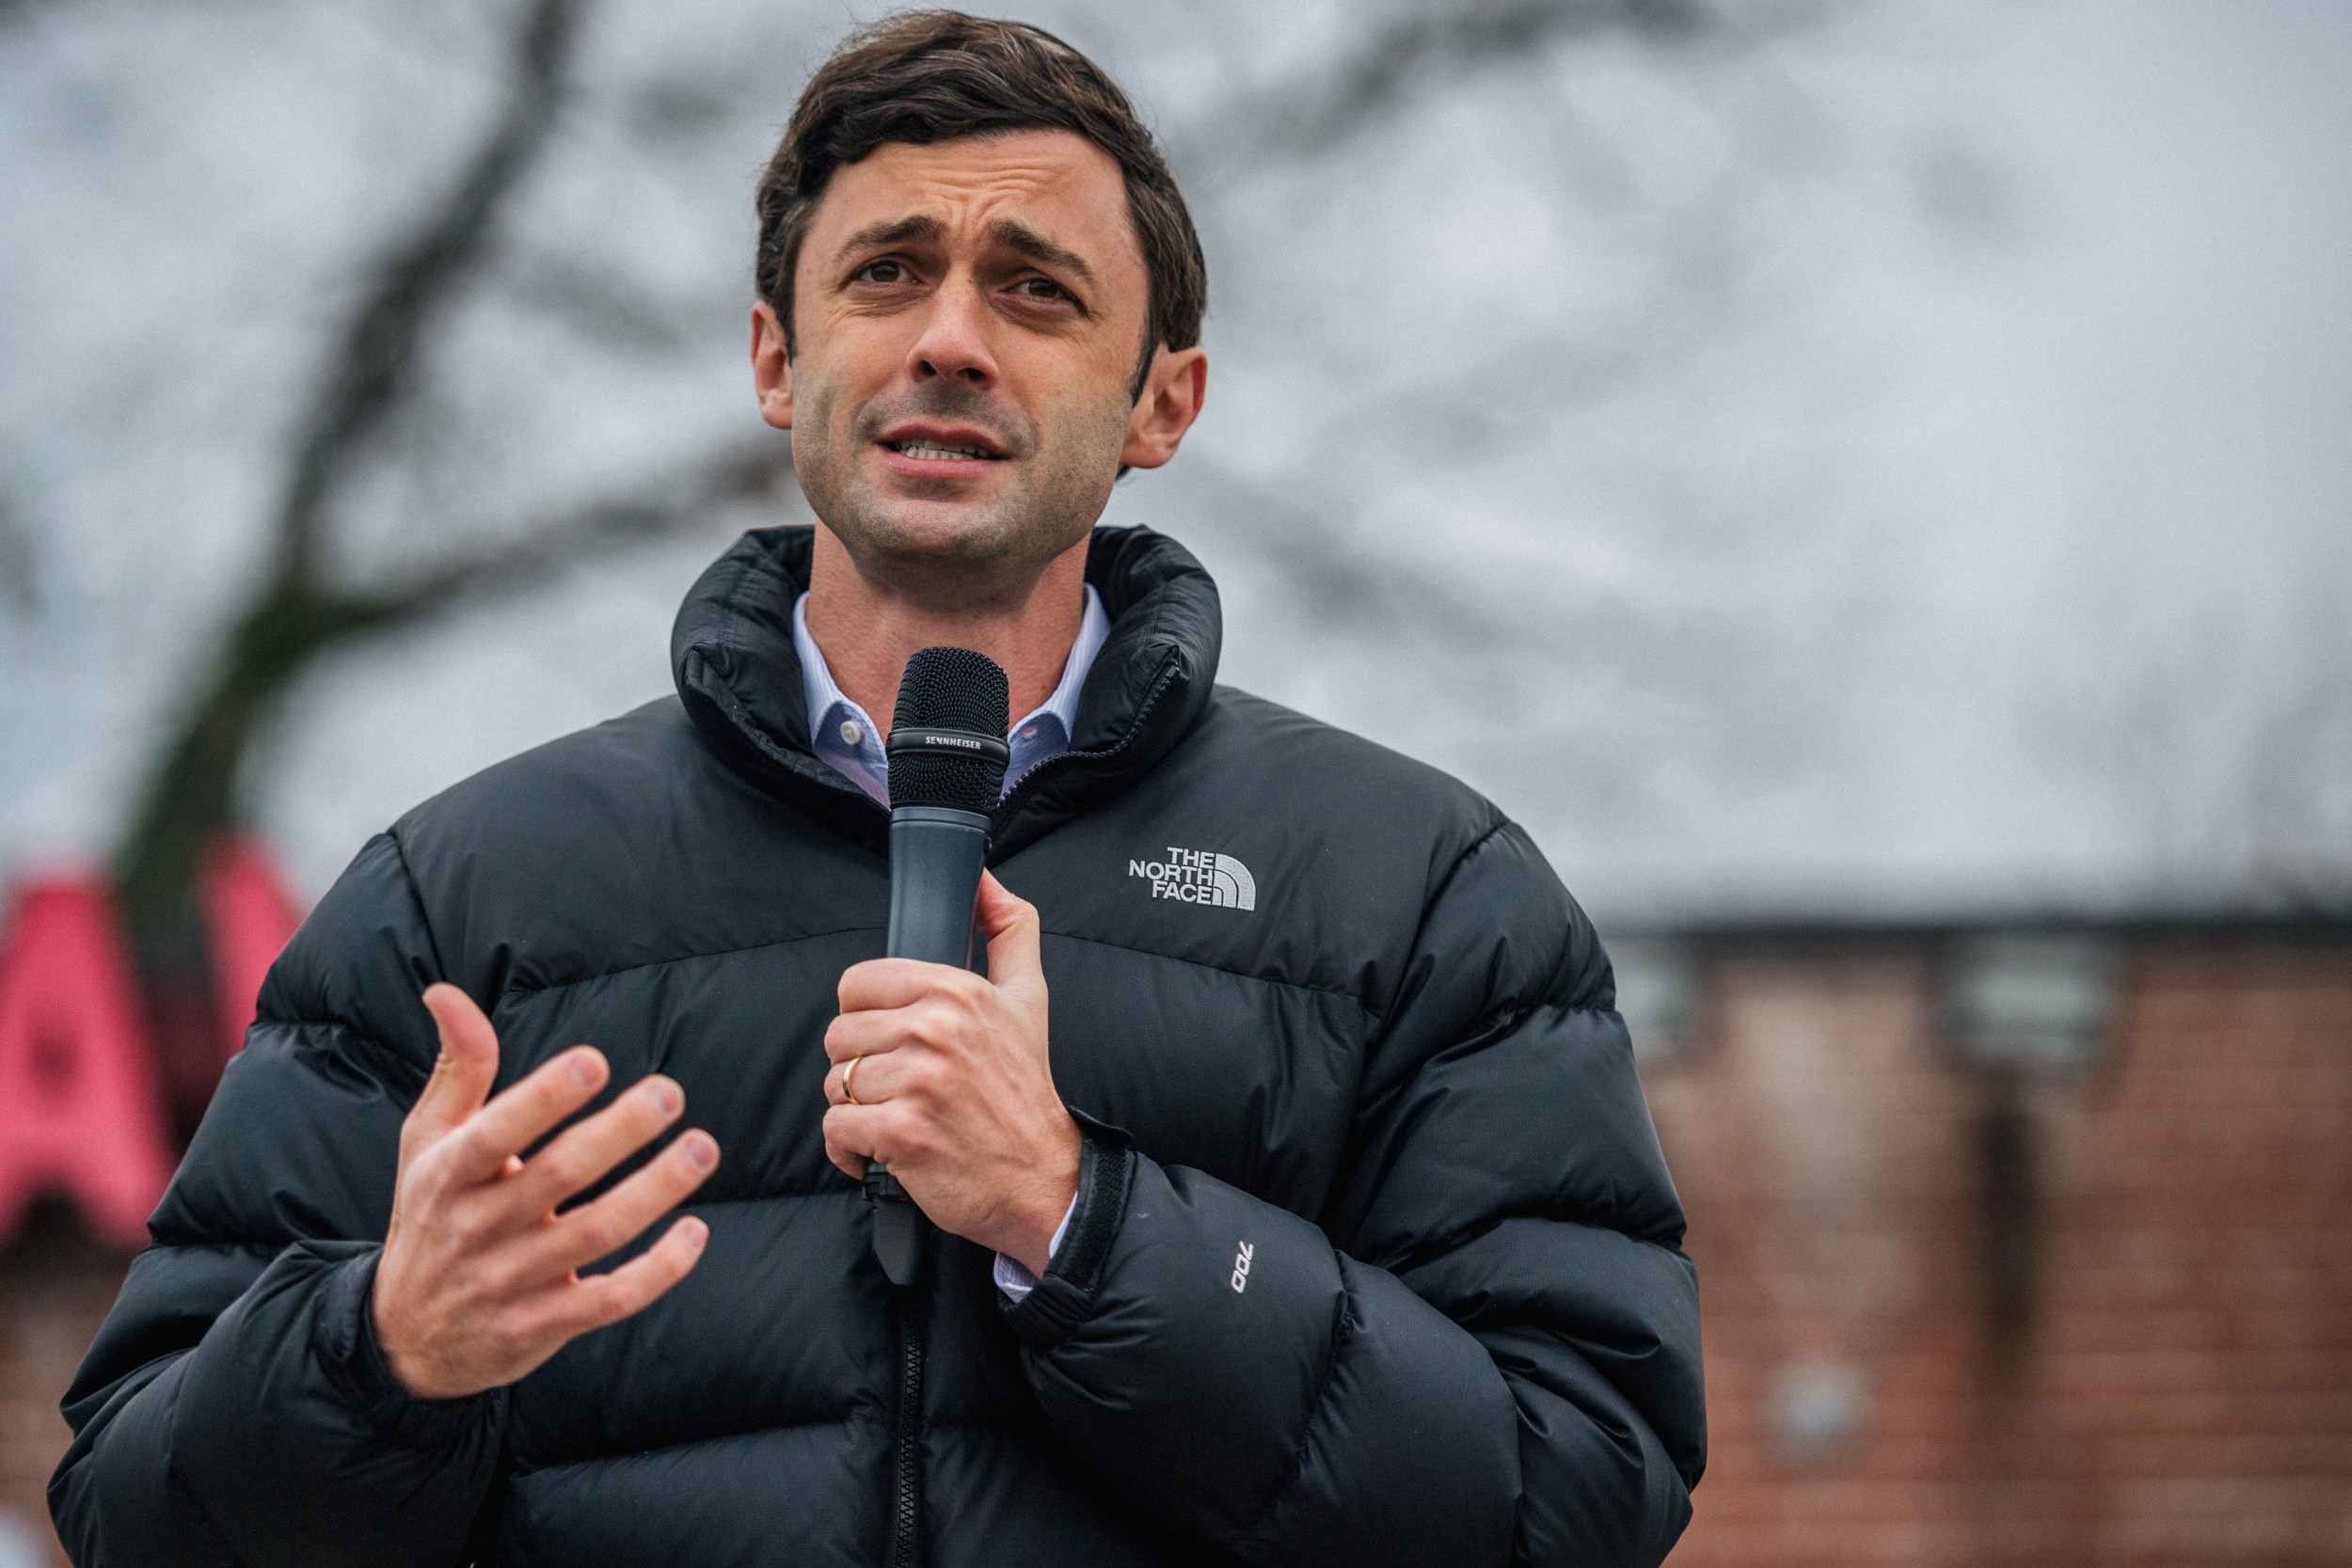 What polls say about David Perdue and Jon Ossoff 4 days before the Georgia elections